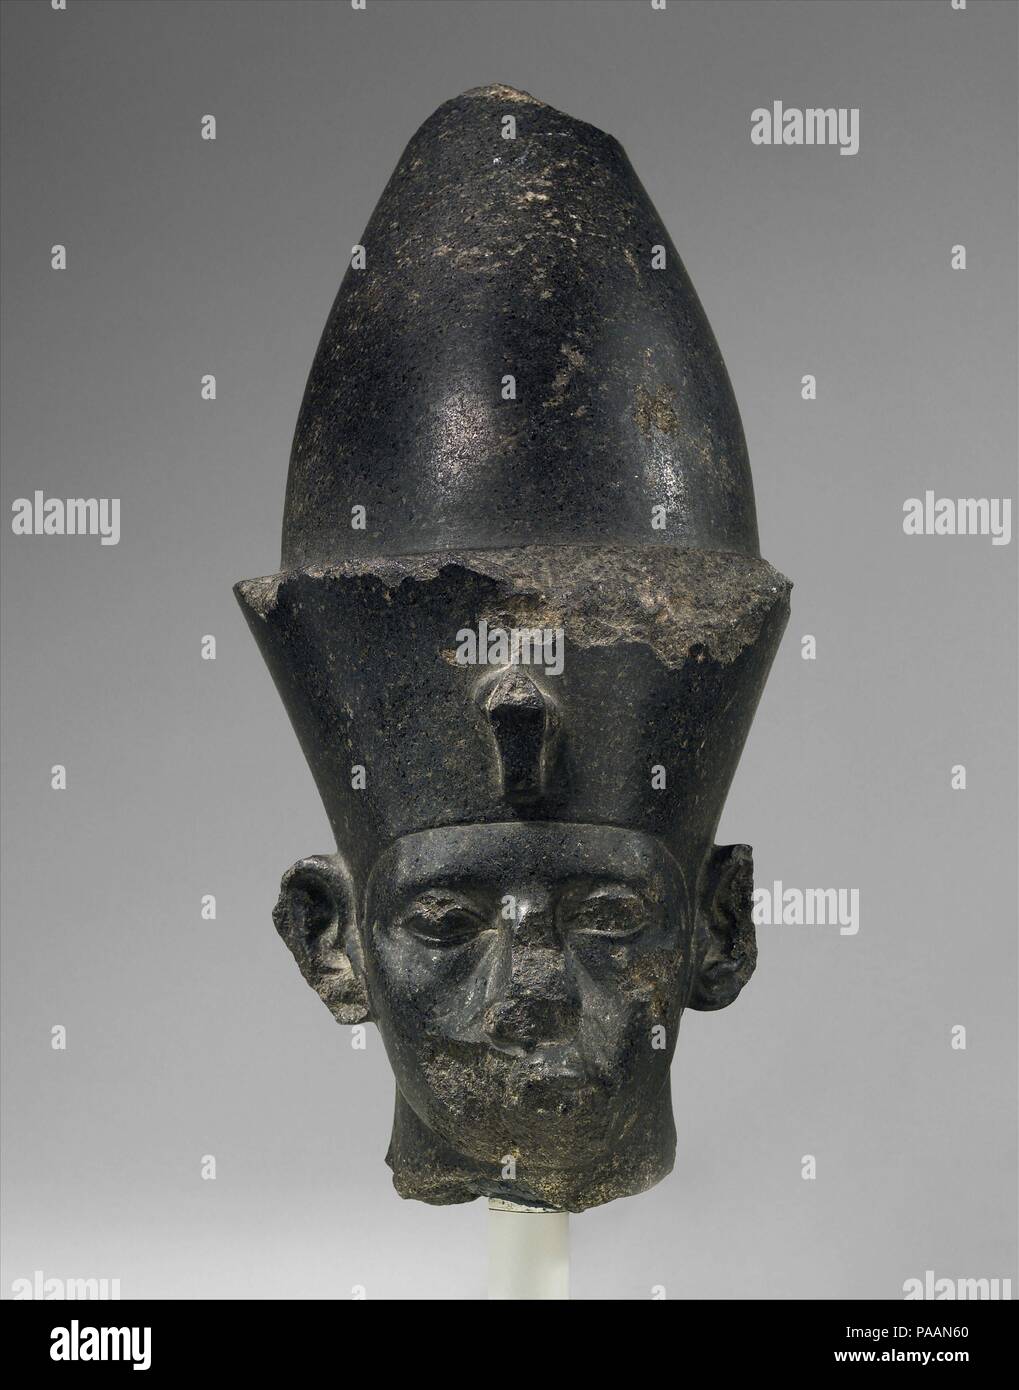 Head of King Amenemhat III. Dimensions: H. 40.6 × W. 18.4 × D. 25.4 cm, 20.9 kg (16 × 7 1/4 × 10 in., 46 lb.). Dynasty: Dynasty 12. Reign: reign of Amenemhat III. Date: ca. 1859-1813 B.C..  Although somewhat battered, this is an impressive image of a pharaoh wearing the double crown of Upper and Lower Egypt. The head is rounder than those depicting Senwosret III; the eyes are less bulbous, and the lids less fleshy. We see, in fact, a portrait of Senwosret's successor Amenemhat III. A piece closely related in style was found at Kom el-Hisn in the western Nile Delta. Like that sculpture the Muse Stock Photo